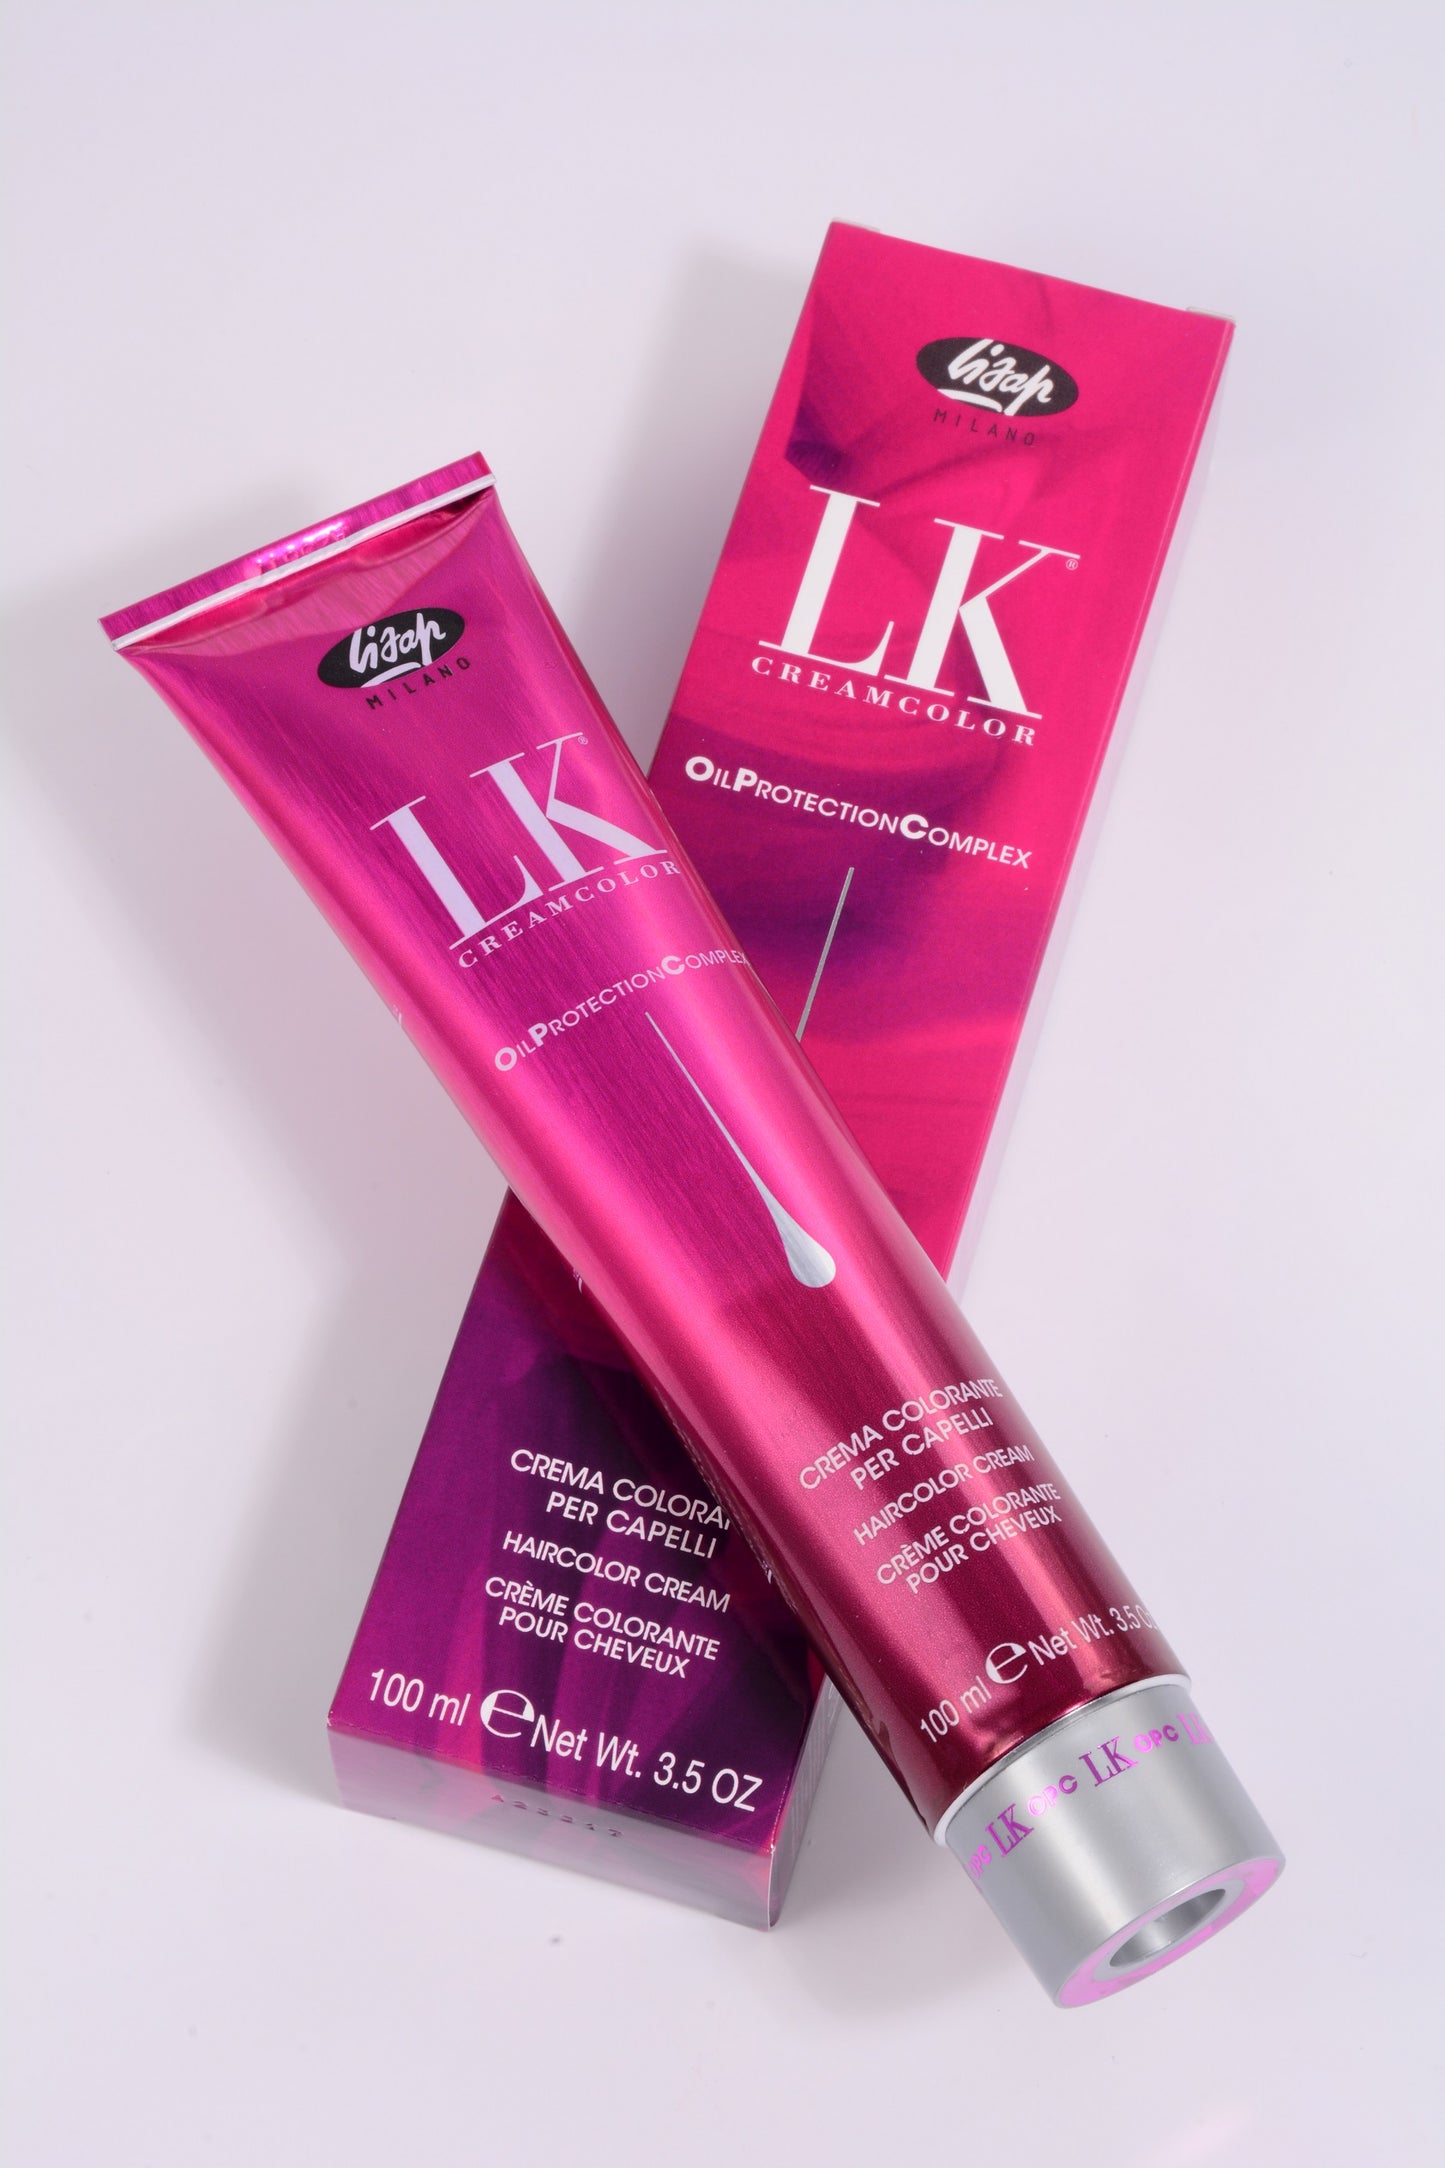 LK Creamcolor 10/3 Oil Protection Complex